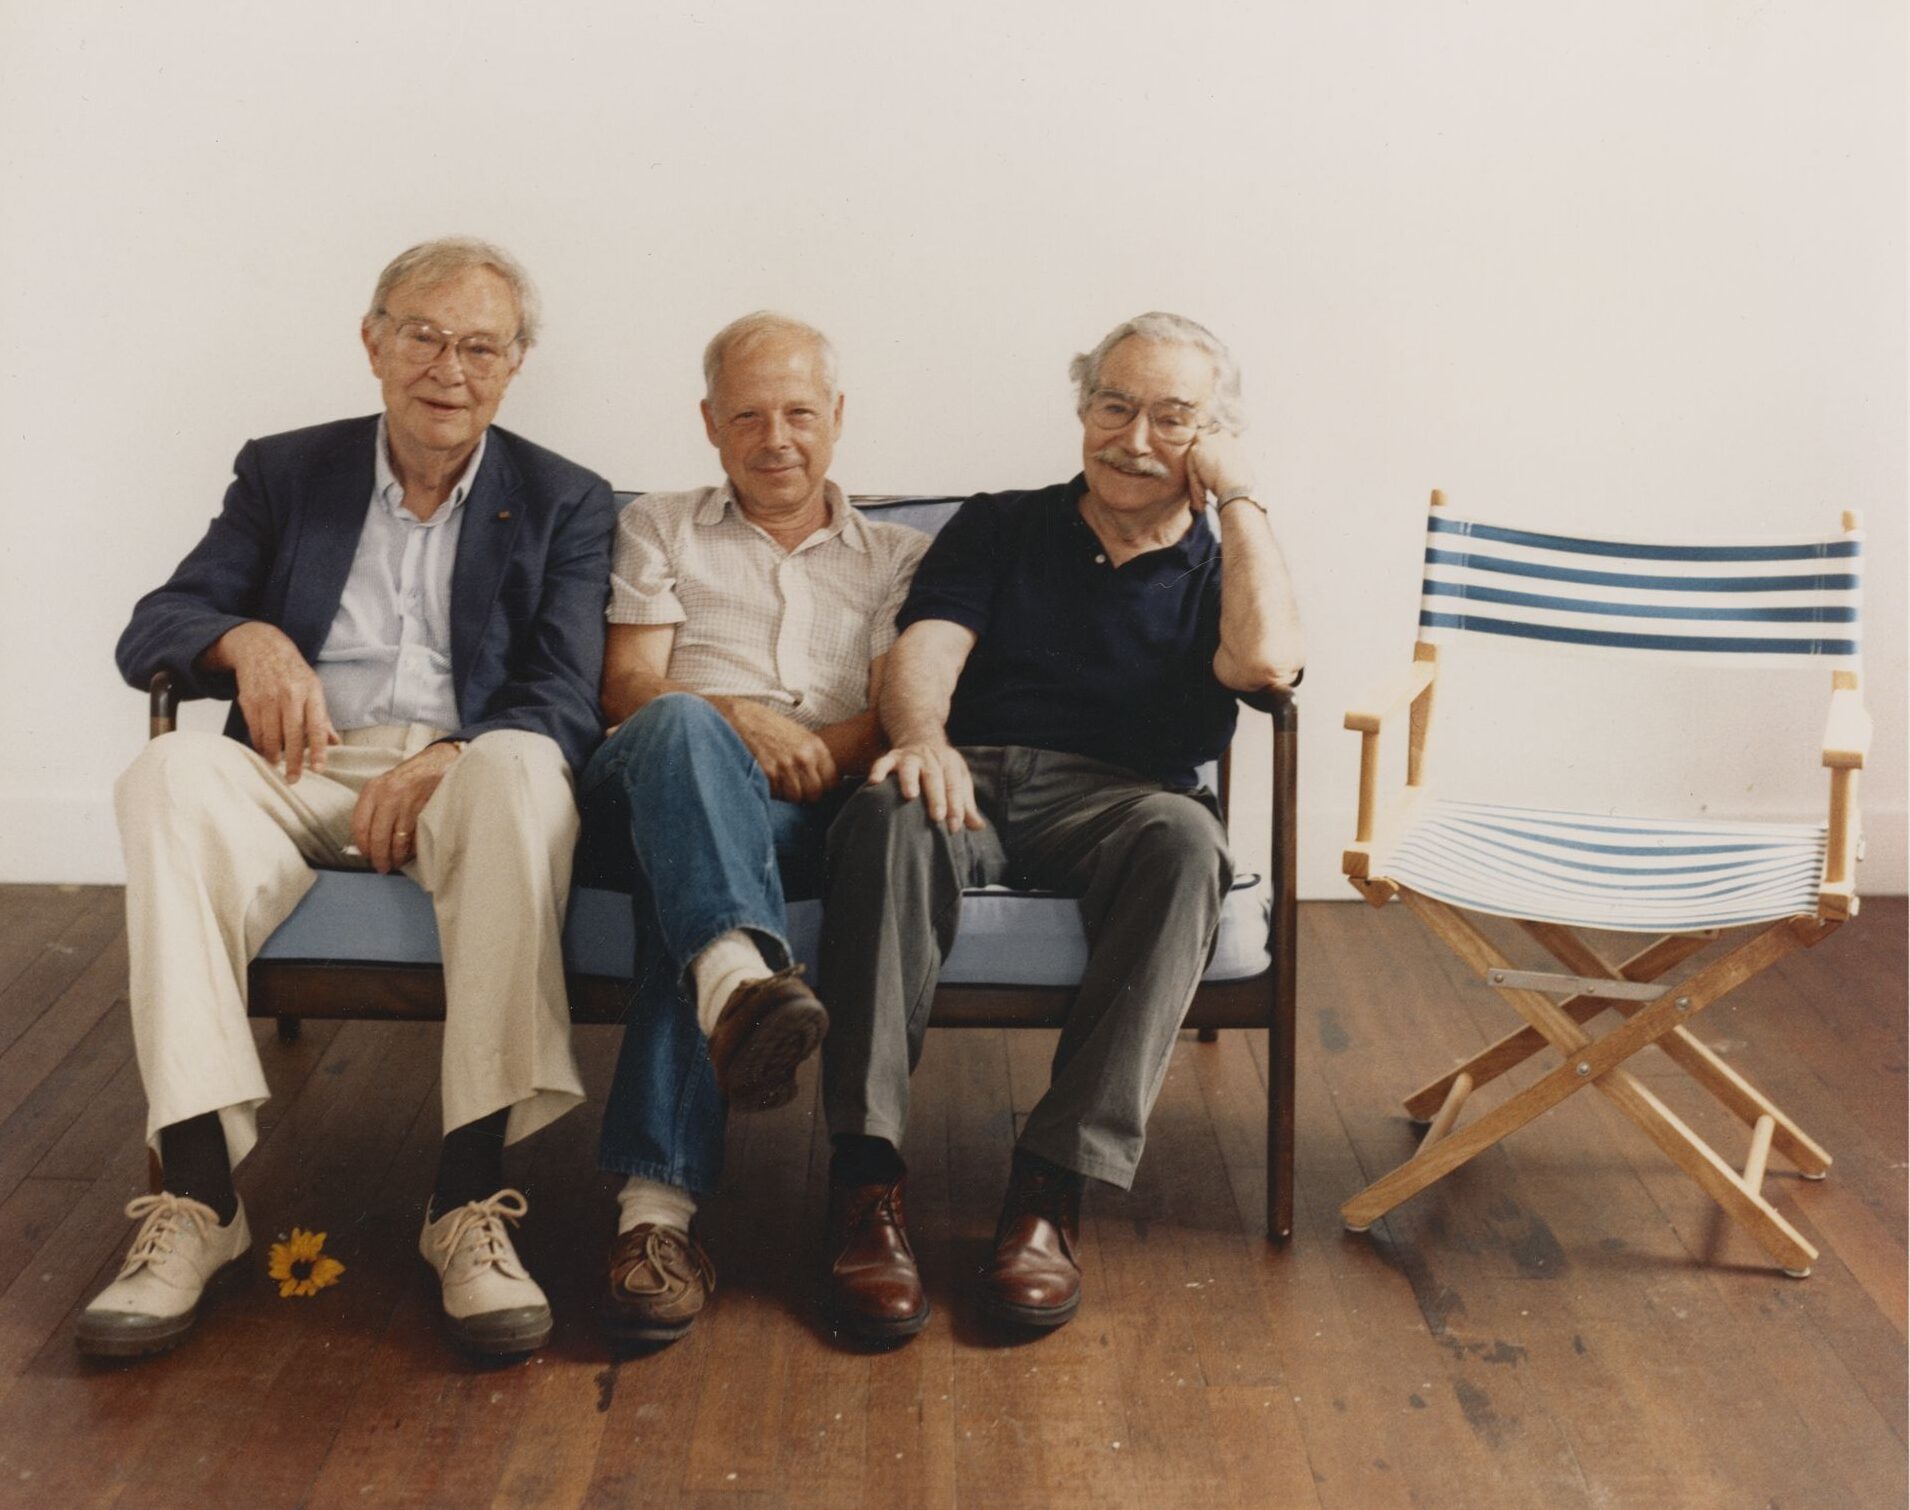 Motherwell (left) with fellow Long Point Gallery artists Ed Giobbi and Leo Manso, summer 1990